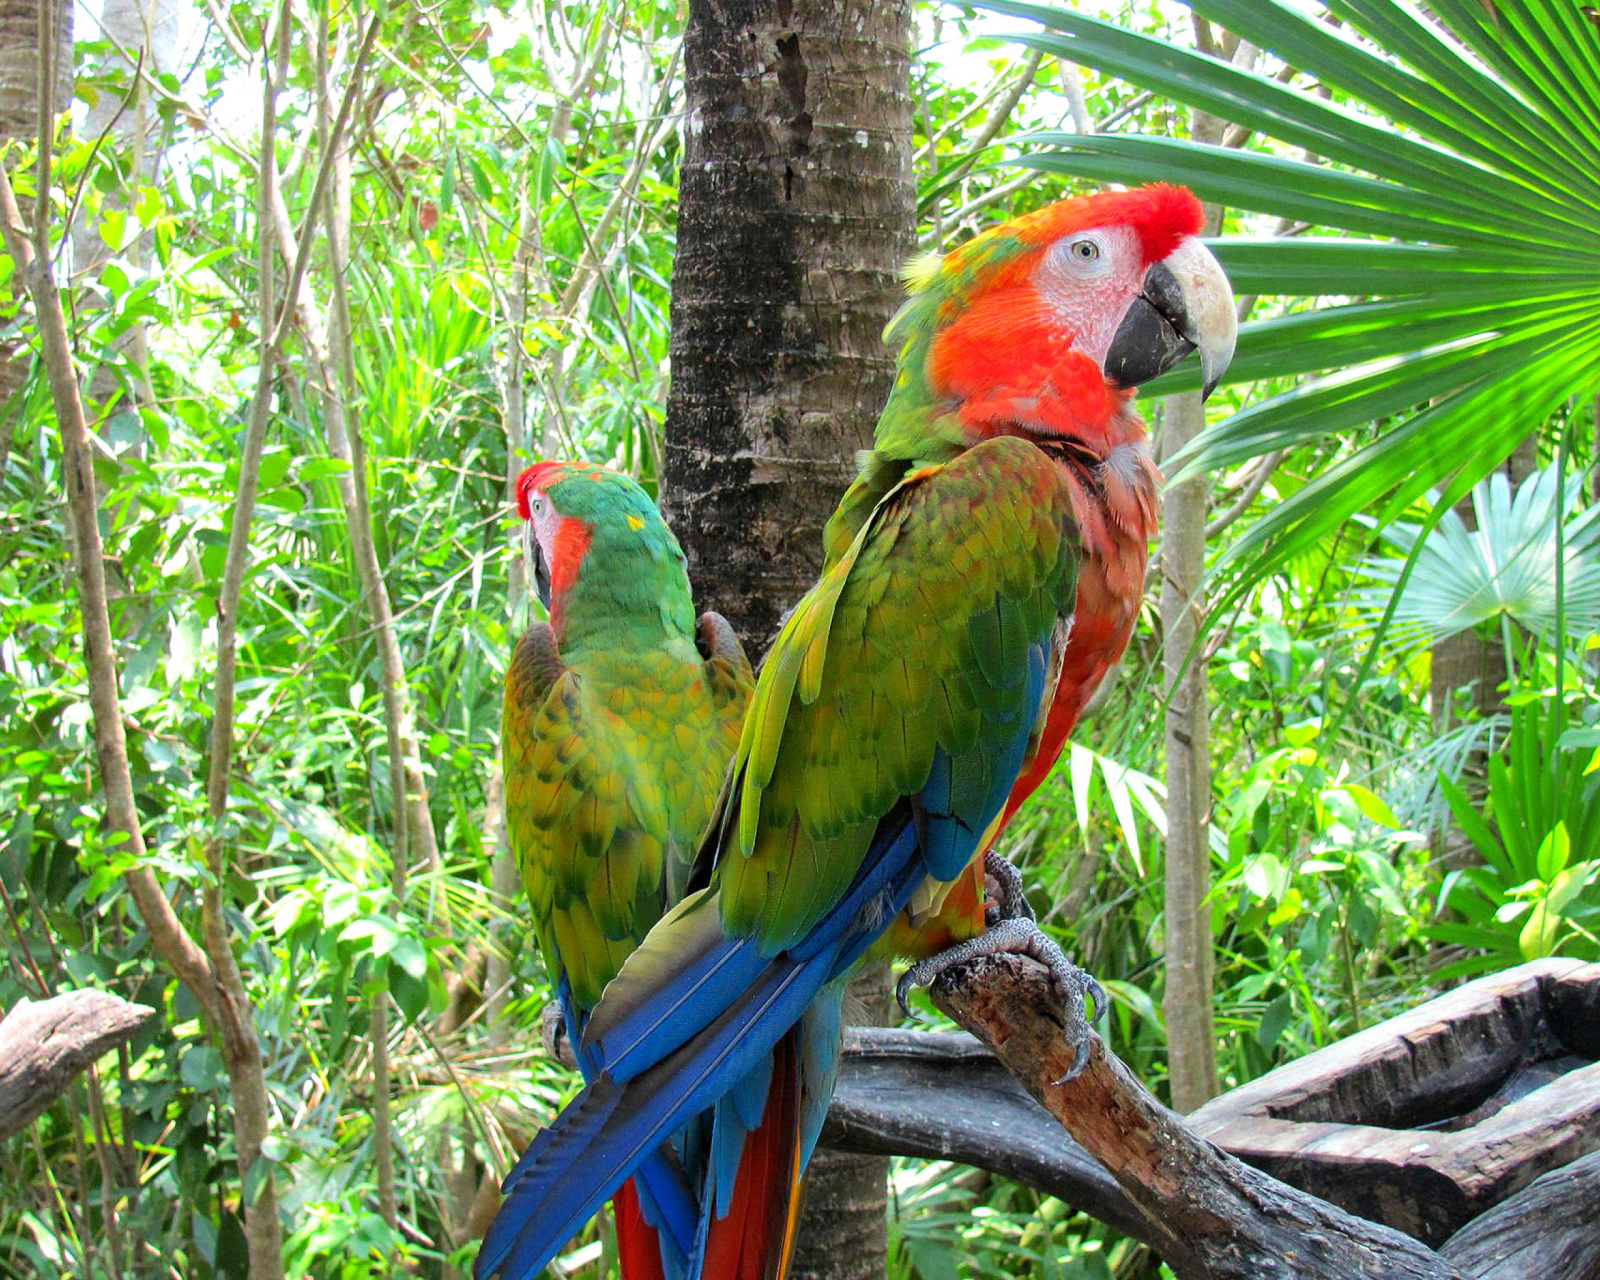 Macaw parrot Amazon forest screenshot #1 1600x1280